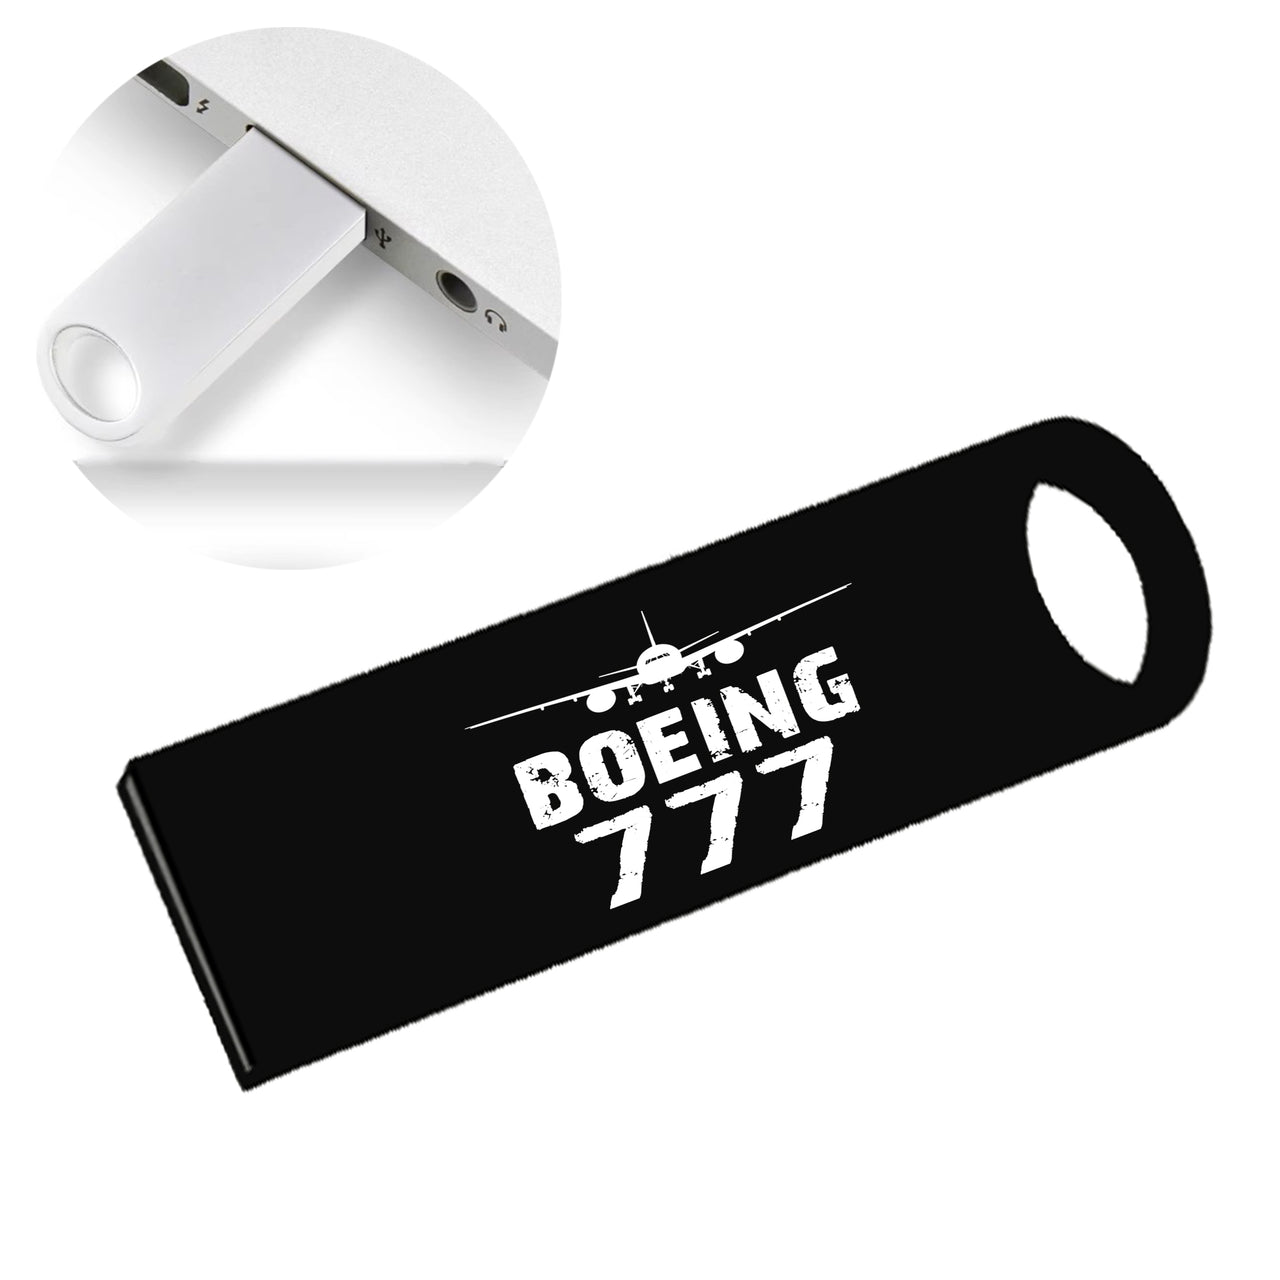 Boeing 777 & Plane Designed Waterproof USB Devices